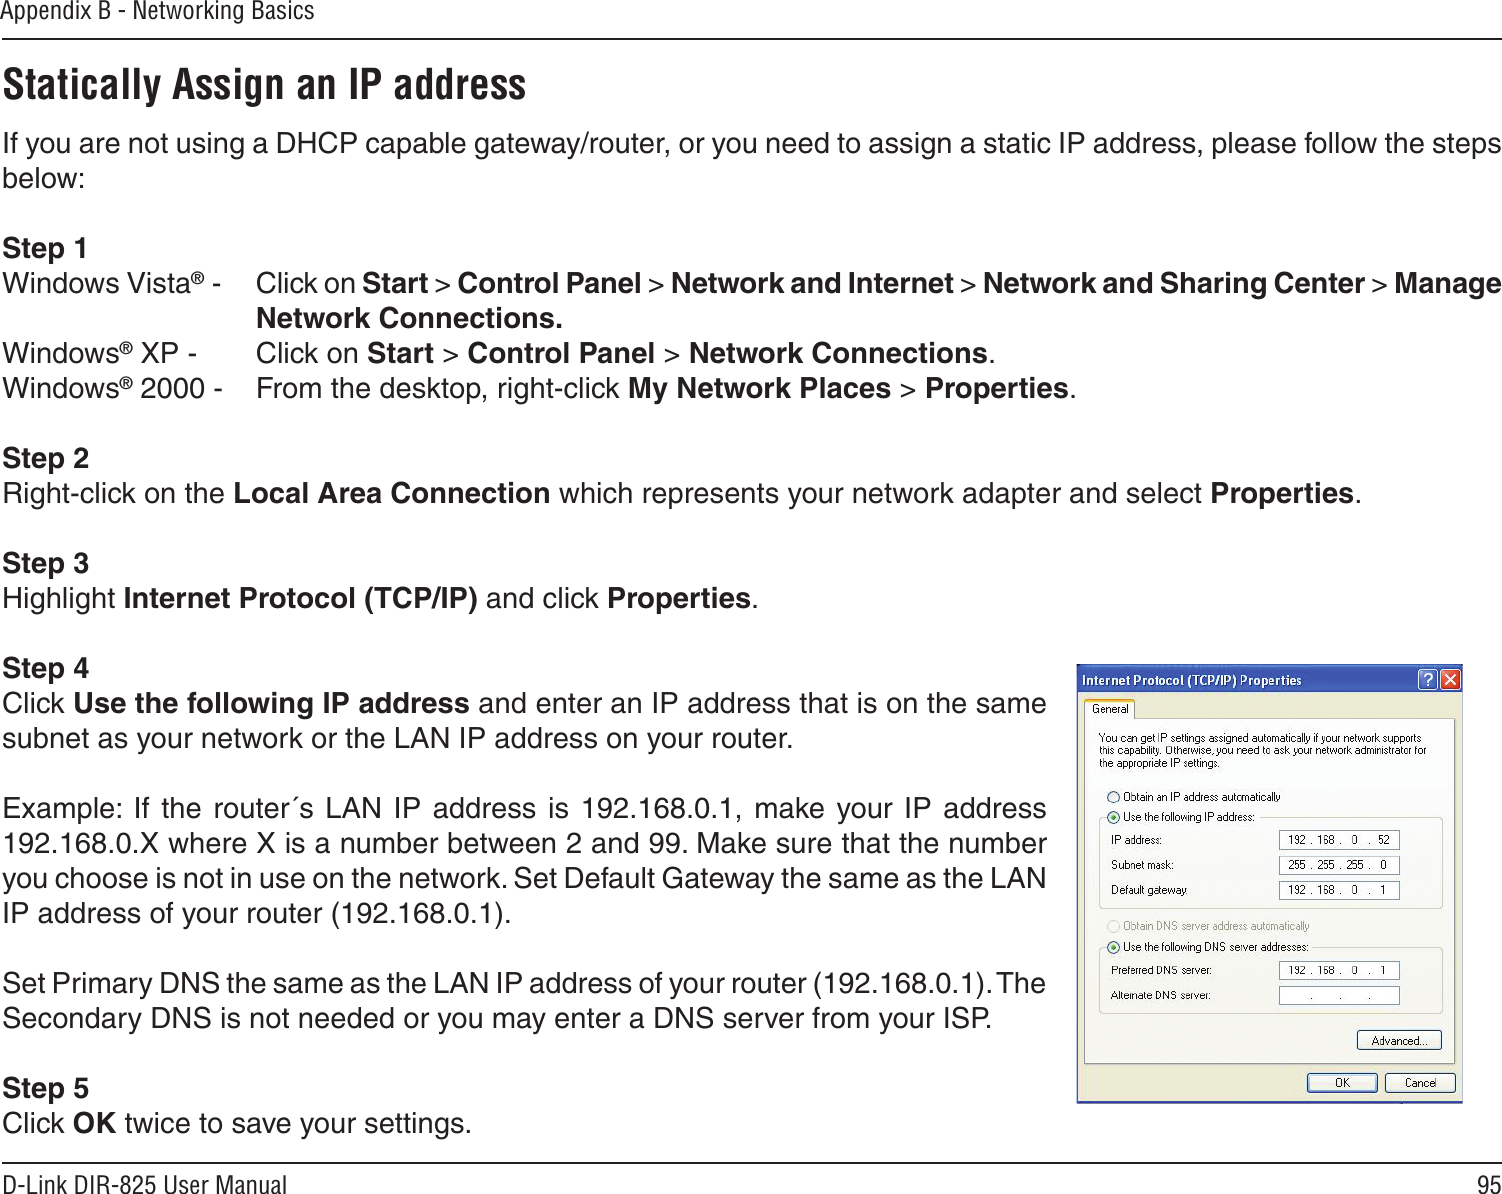 95D-Link DIR-825 User ManualAppendix B - Networking BasicsStatically Assign an IP addressIf you are not using a DHCP capable gateway/router, or you need to assign a static IP address, please follow the steps below:Step 1Windows Vista® -  Click on Start &gt; Control Panel &gt; Network and Internet &gt; Network and Sharing Center &gt; Manage Network Connections.Windows® XP -  Click on Start &gt; Control Panel &gt; Network Connections.Windows® 2000 -  From the desktop, right-click My Network Places &gt; Properties.Step 2Right-click on the Local Area Connection which represents your network adapter and select Properties.Step 3Highlight Internet Protocol (TCP/IP) and click Properties.Step 4Click Use the following IP address and enter an IP address that is on the same subnet as your network or the LAN IP address on your router. Example:  If the  router´s LAN  IP  address  is  192.168.0.1,  make your IP  address 192.168.0.X where X is a number between 2 and 99. Make sure that the number you choose is not in use on the network. Set Default Gateway the same as the LAN IP address of your router (192.168.0.1). Set Primary DNS the same as the LAN IP address of your router (192.168.0.1). The Secondary DNS is not needed or you may enter a DNS server from your ISP.Step 5Click OK twice to save your settings.